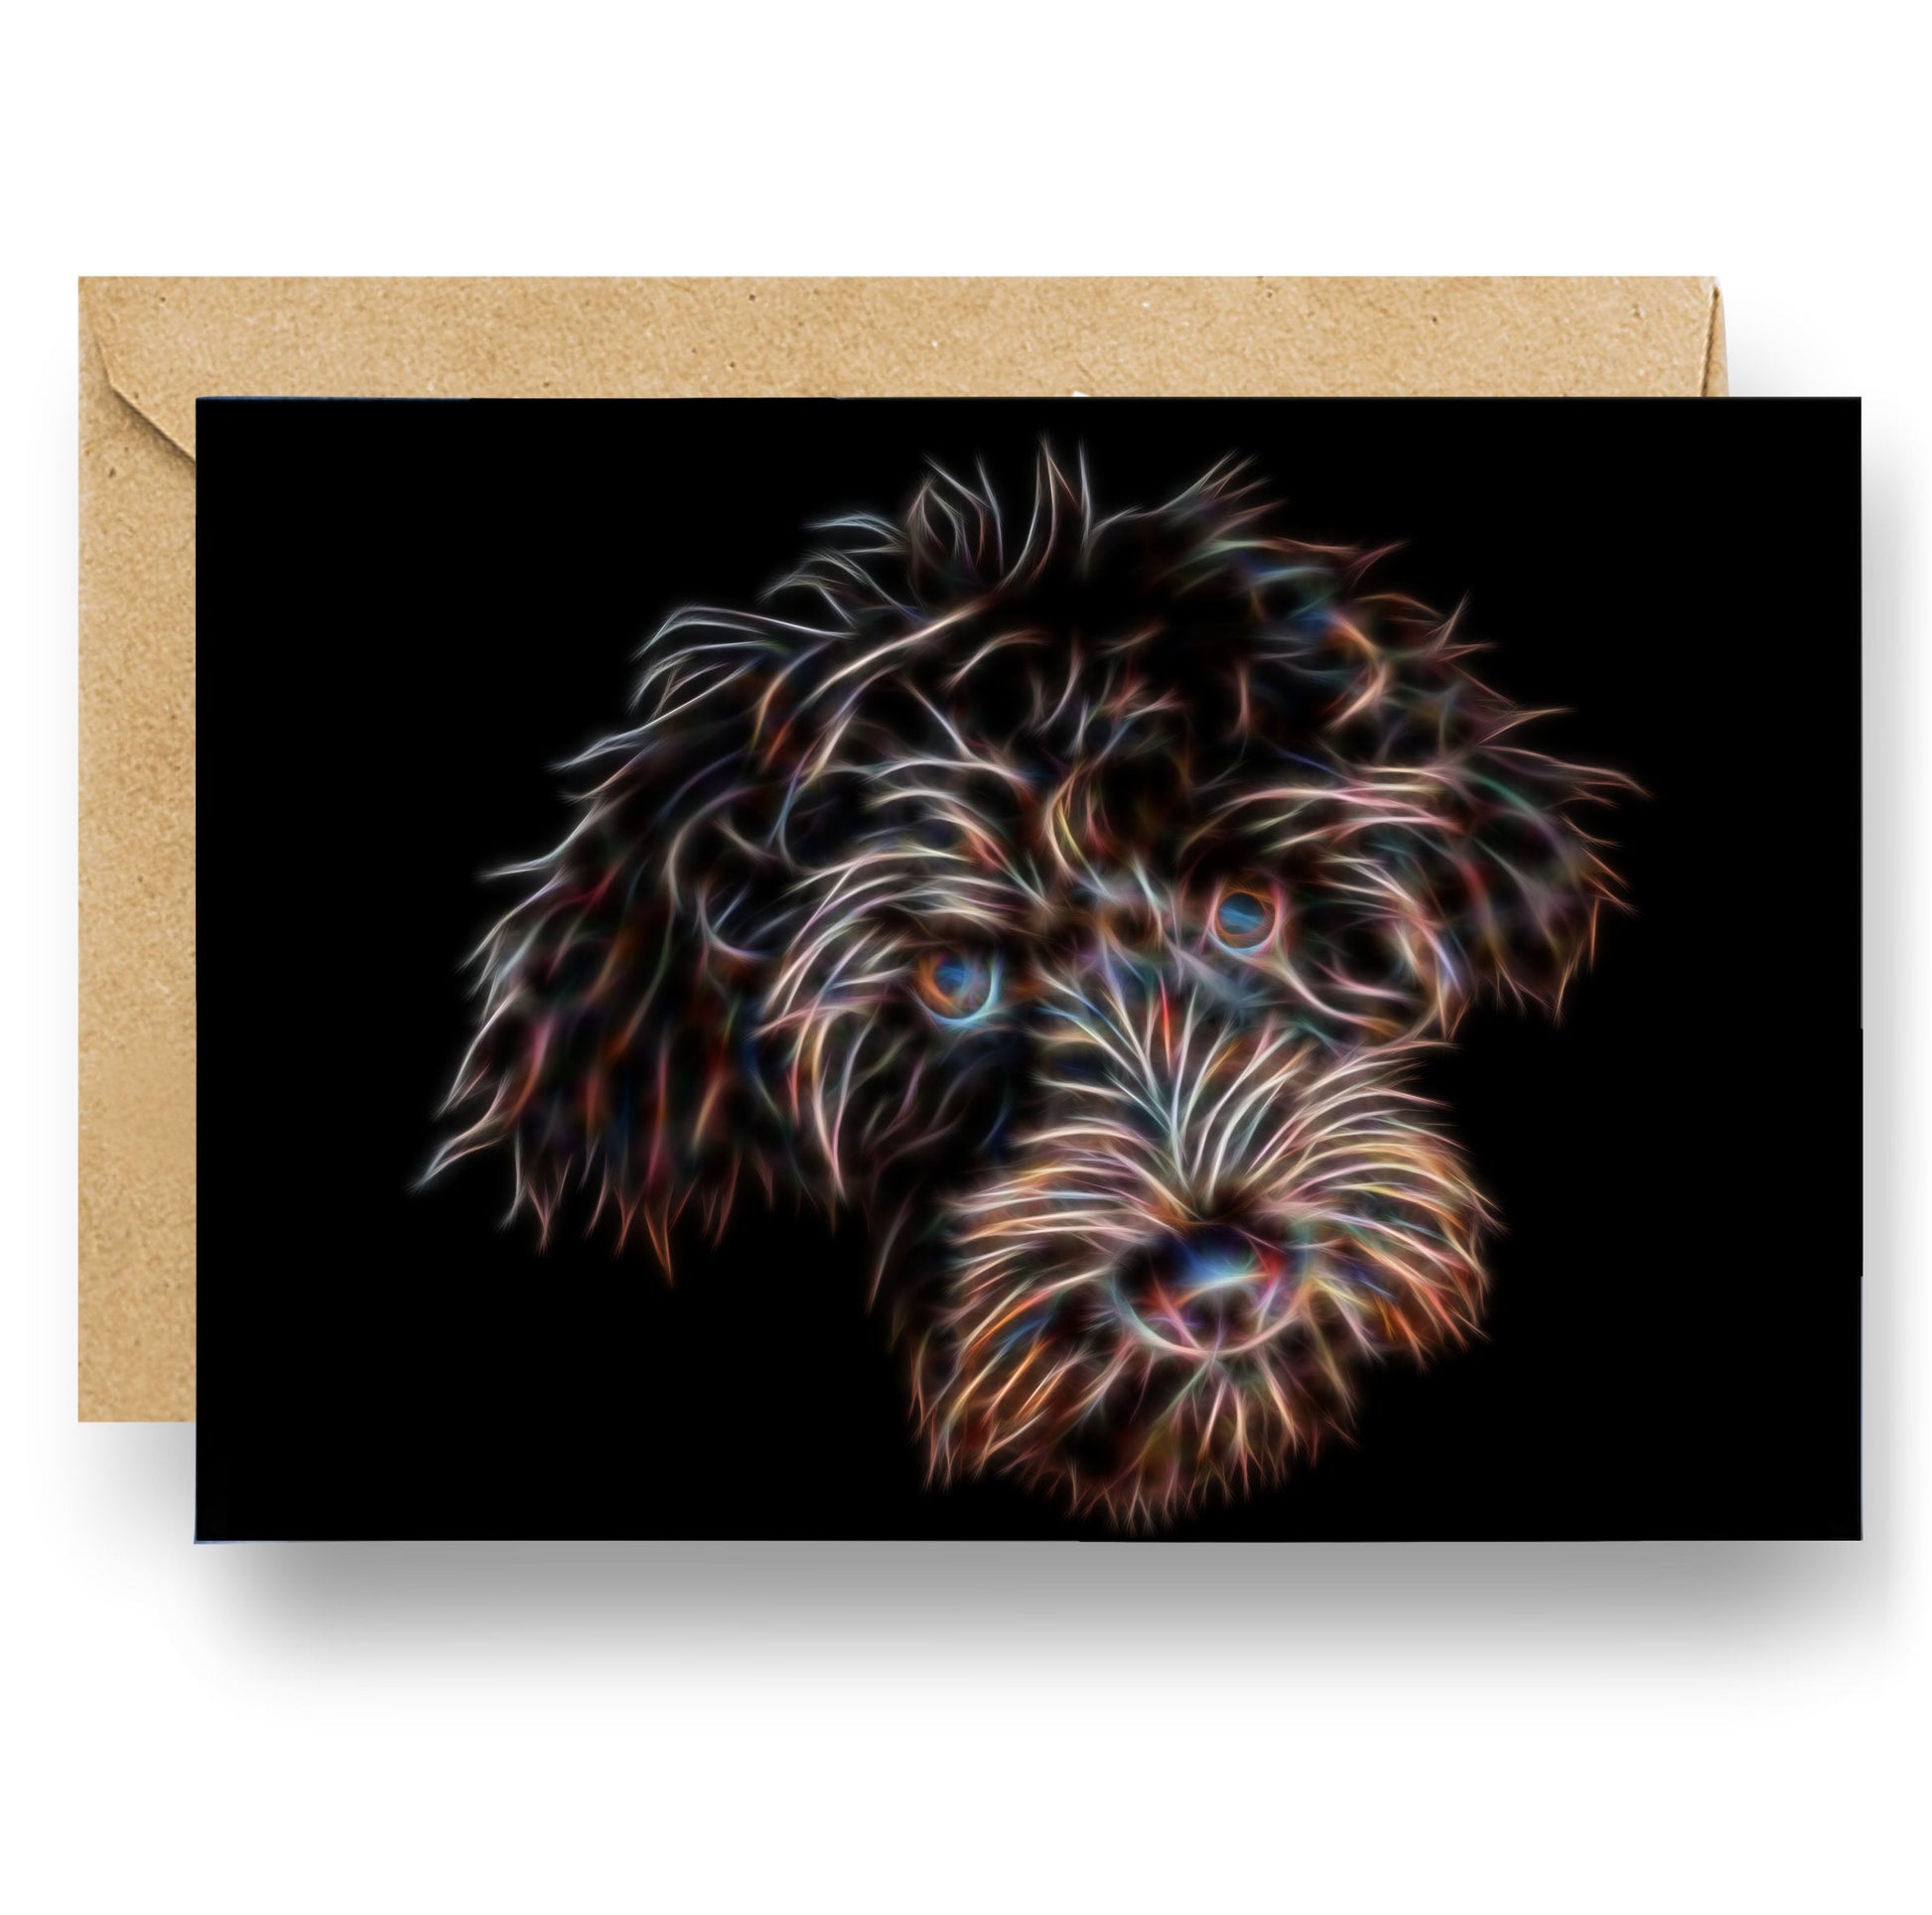 Chocolate Brown Labradoodle Greeting Card with Stunning Fractal Art Design